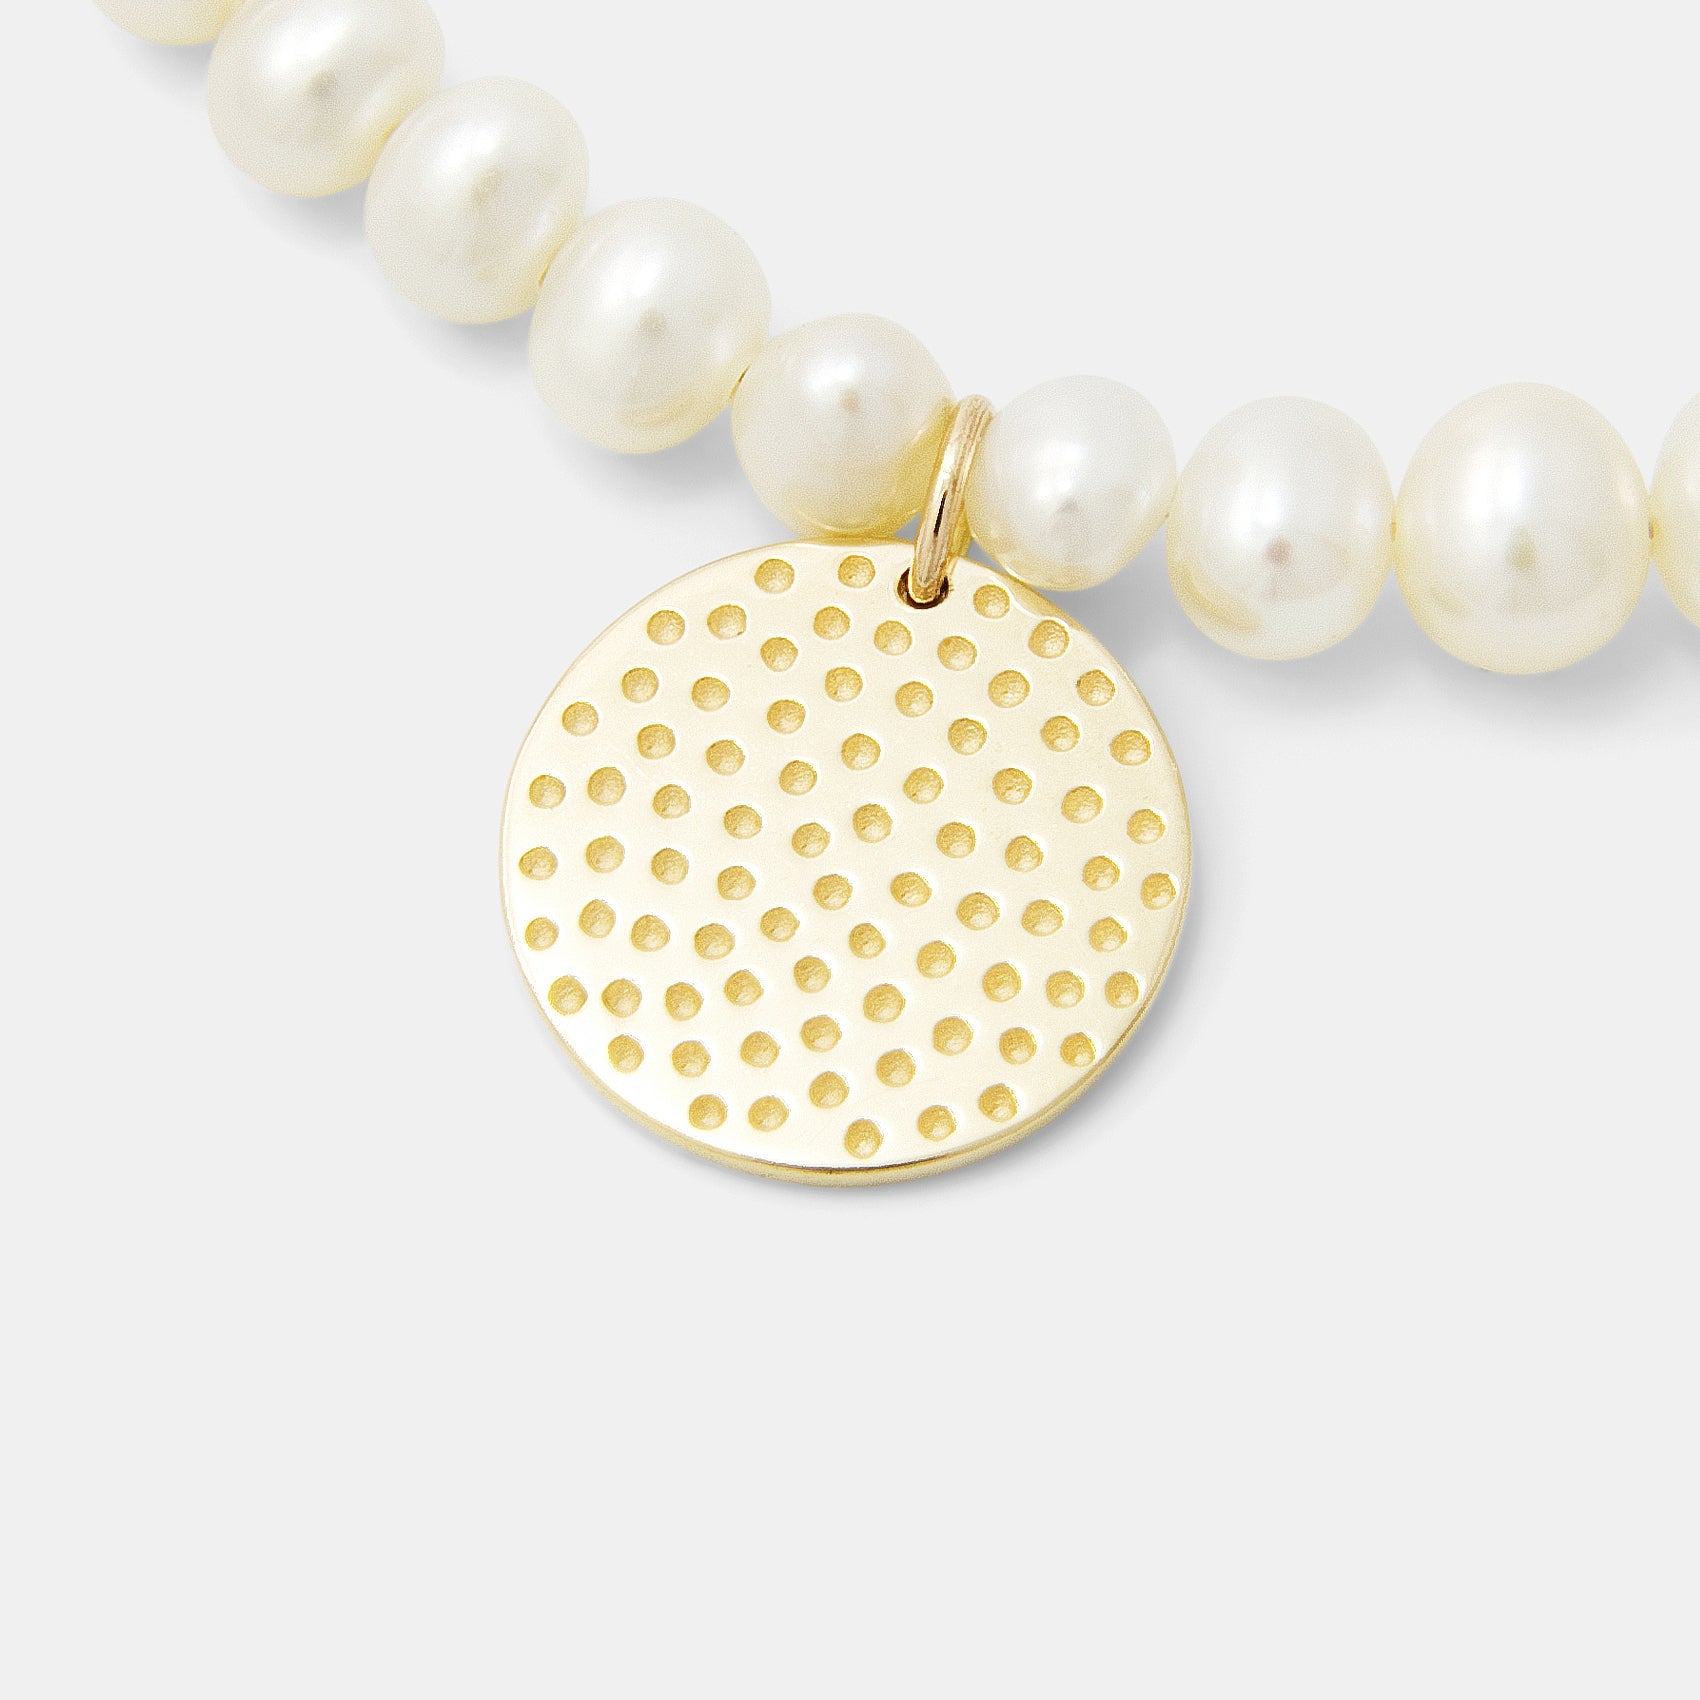 Dots texture solid gold pendant on pearls - Simone Walsh Jewellery Australia